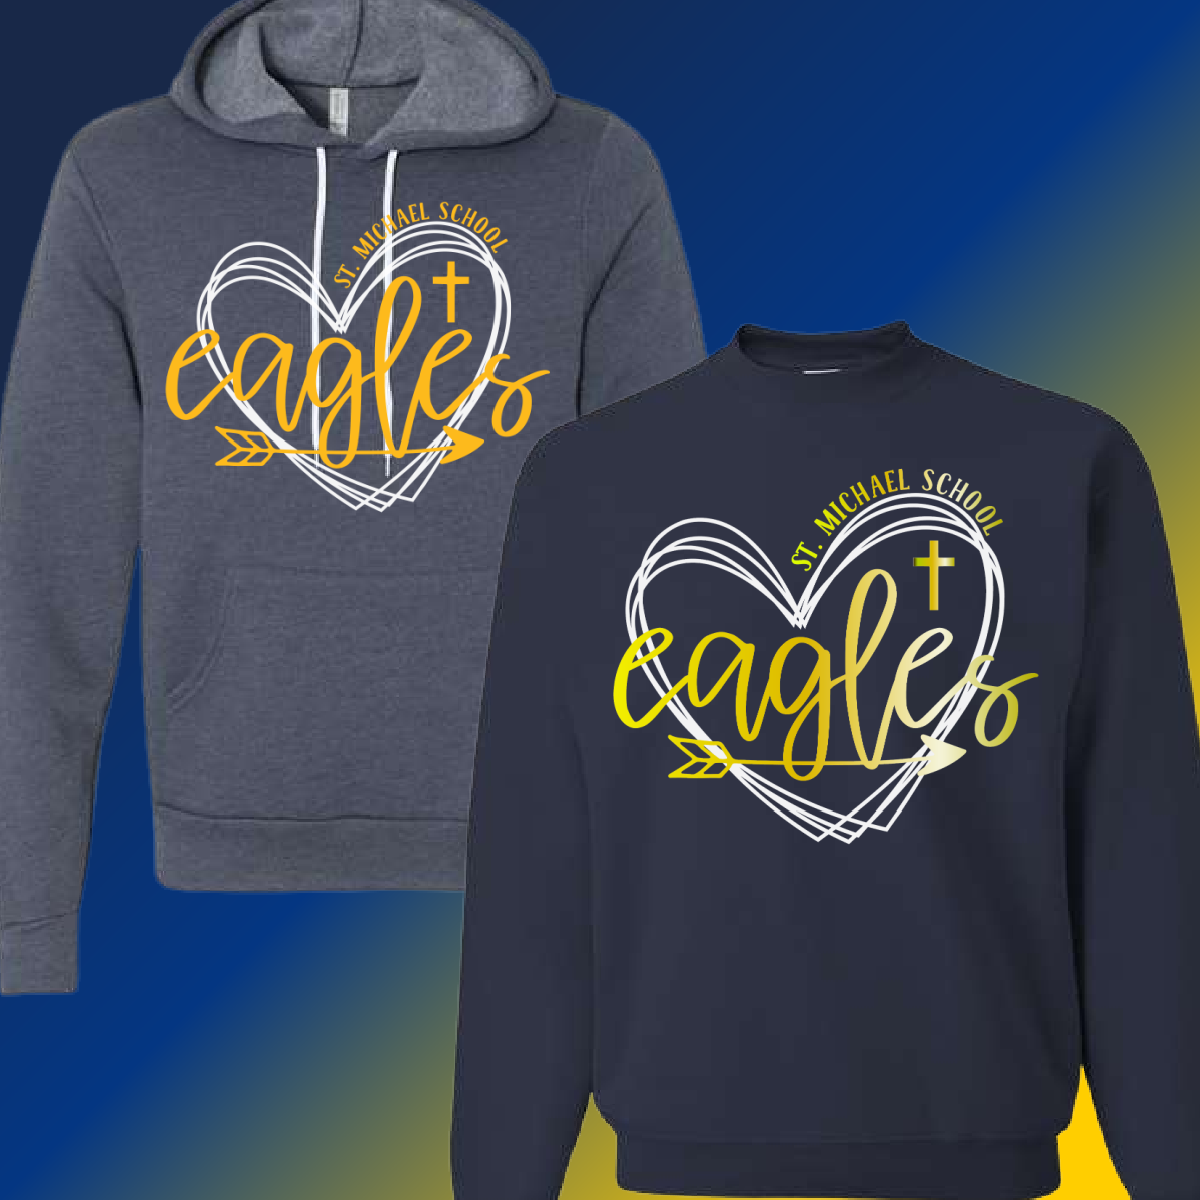 St. Michael Eagles  - Heart Sweatshirt (Youth & Adult Sizes Available)